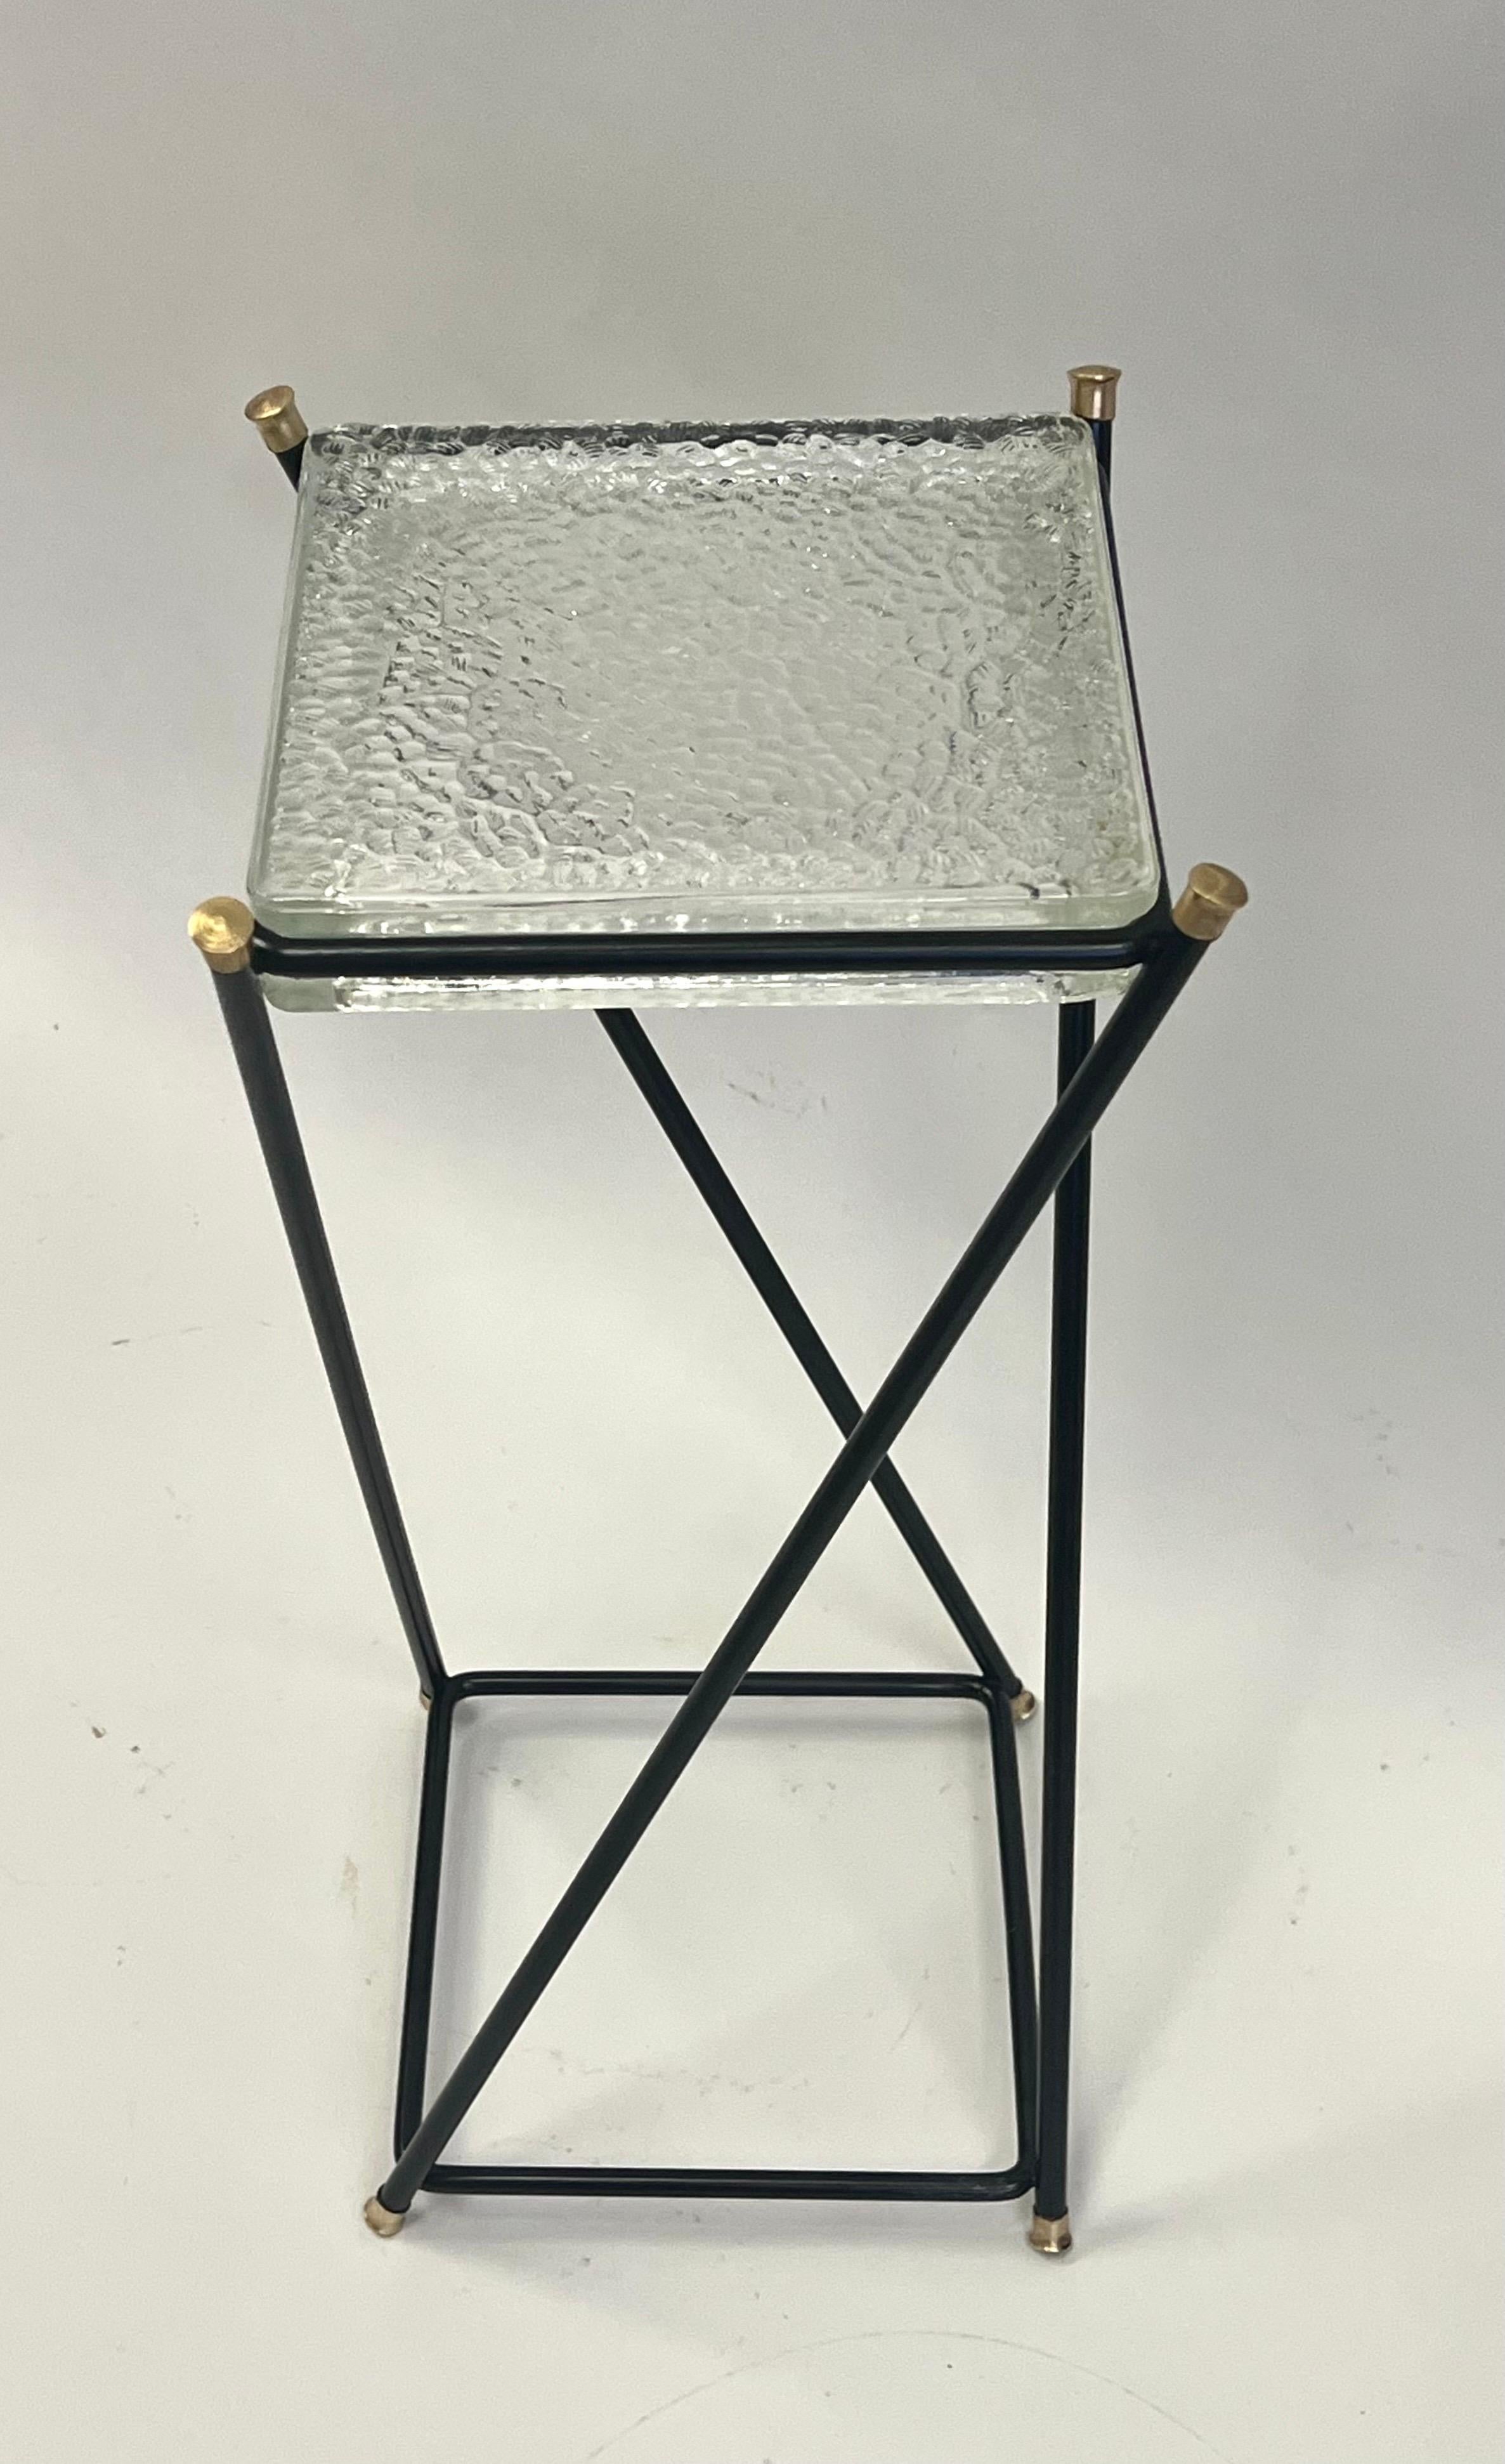 A Rare and Exceptional French Midcentury Modern Side / End Table or Gueridon by Jacques Adnet and Attributed to Max ingrand and the Saint Gobain Glass Works, Paris. Jacques Adnet was one of the premiere creators of the French Art Deco and